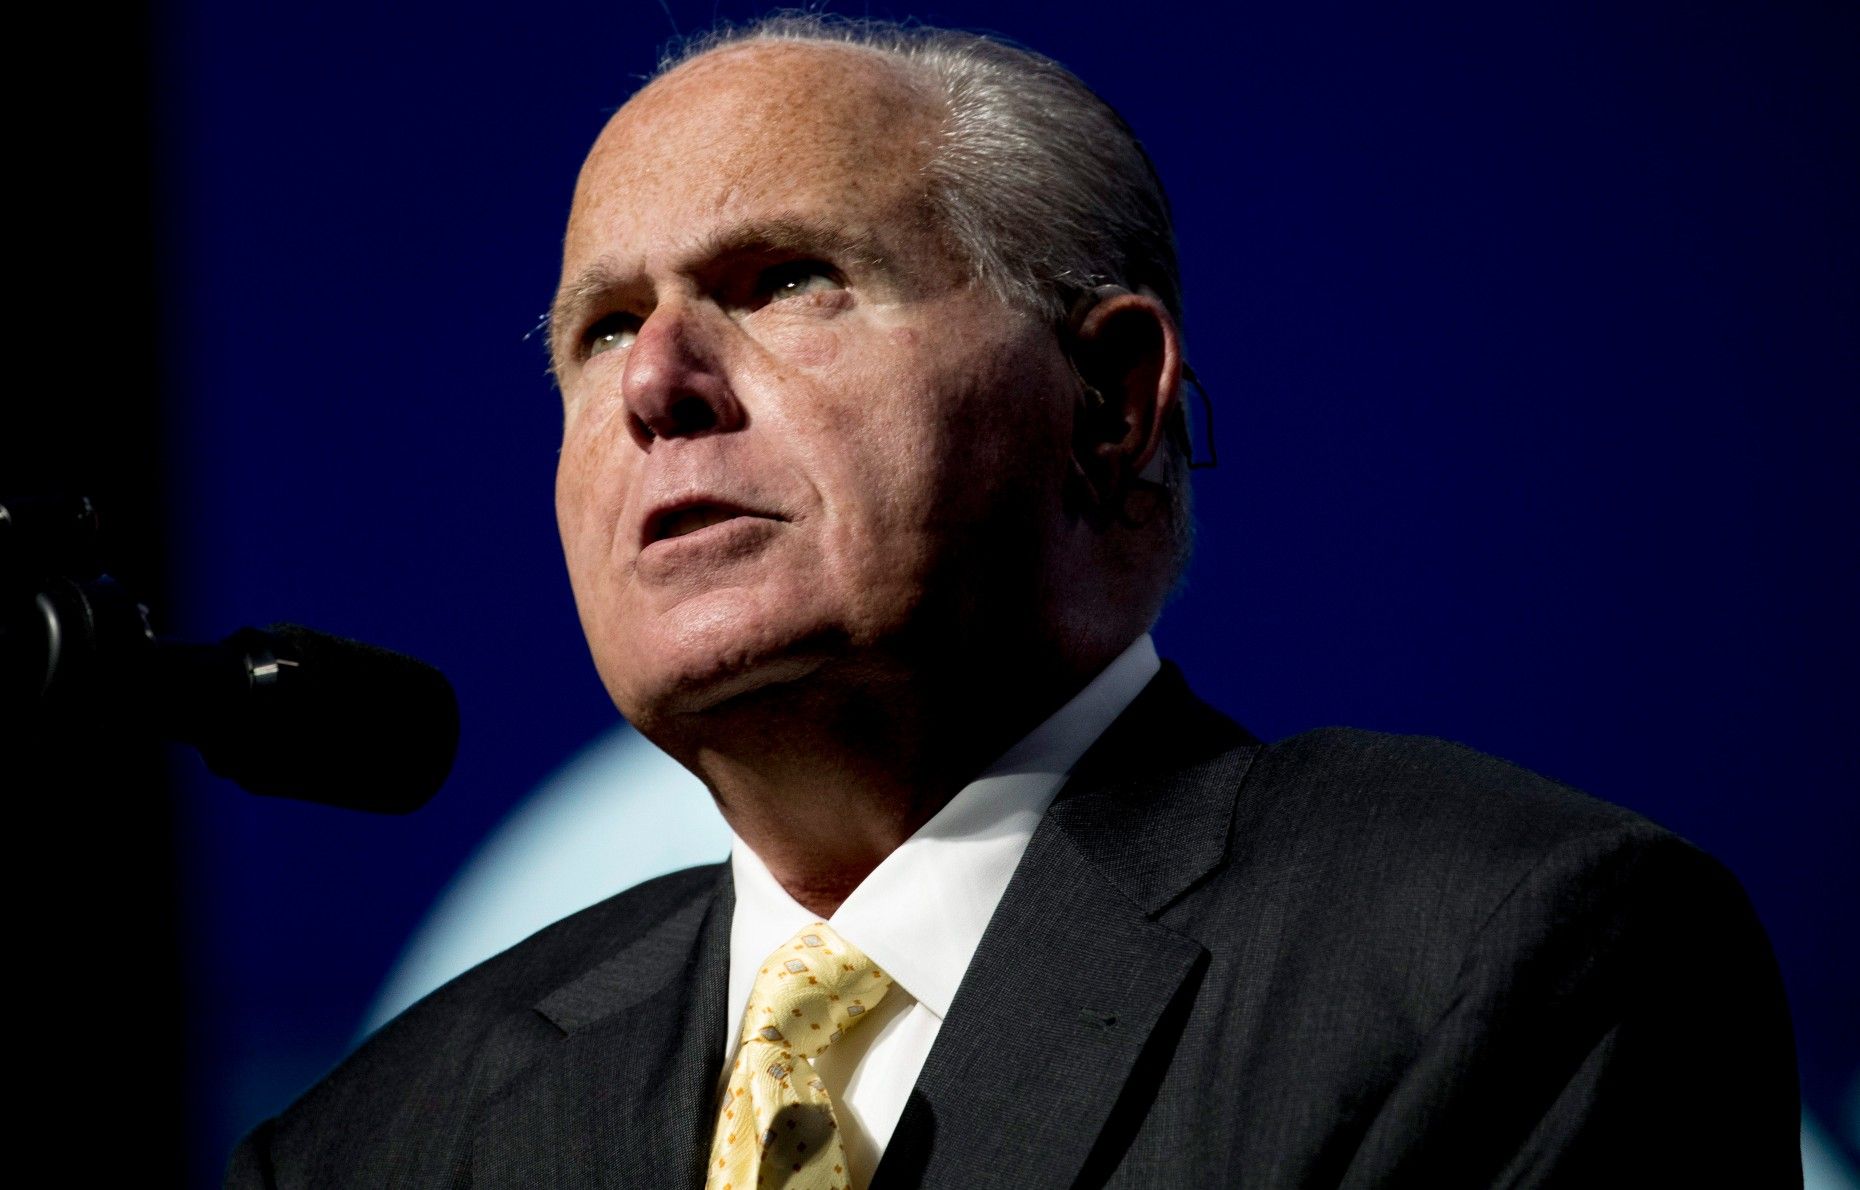 Rush Limbaugh shared his lung cancer diagnosis earlier this year.